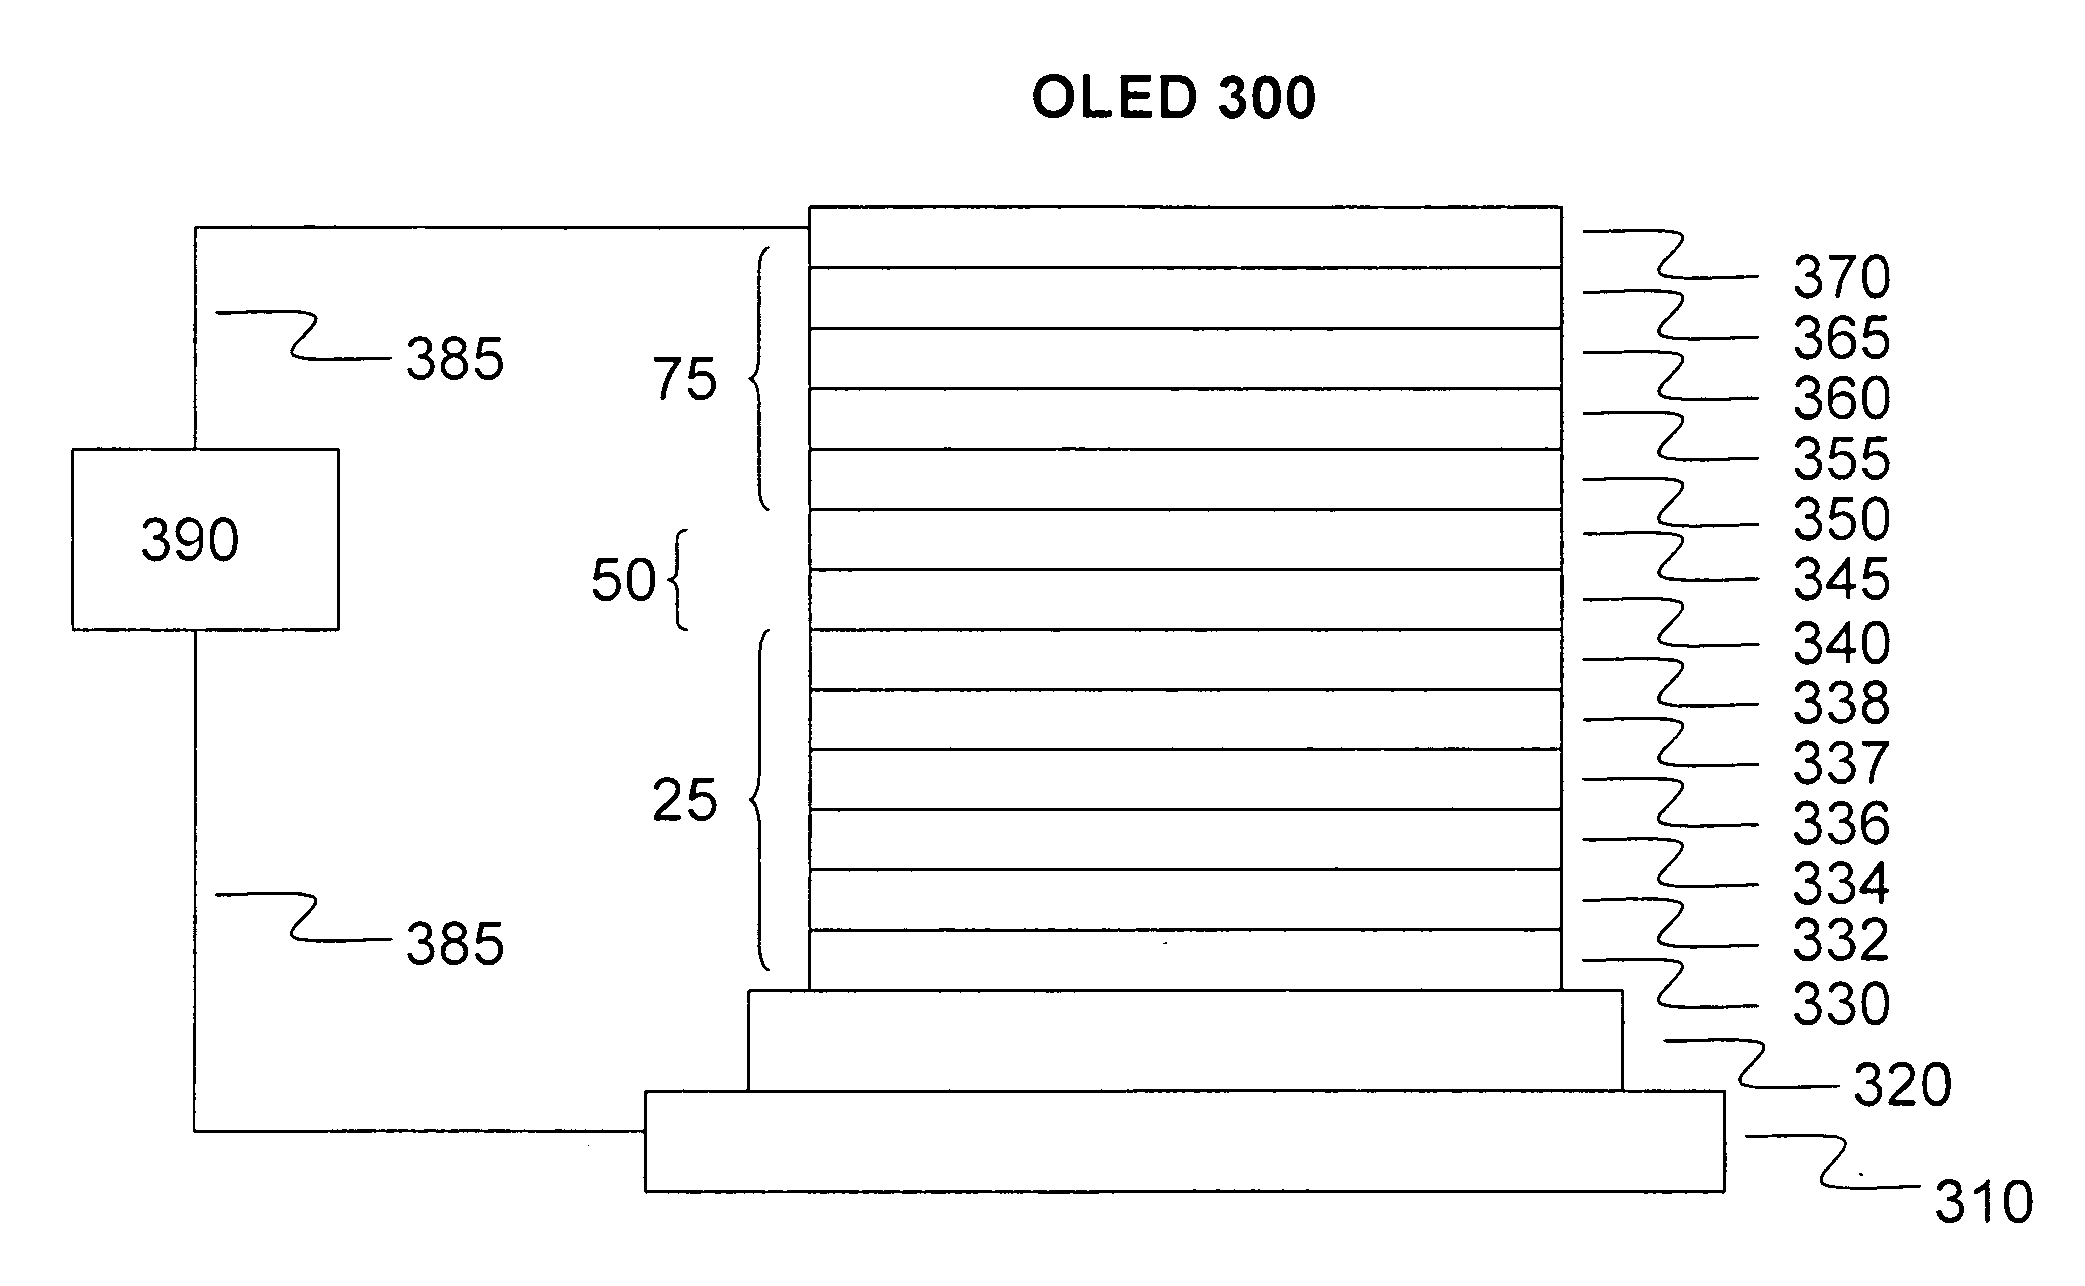 White OLED with two blue light-emitting layers